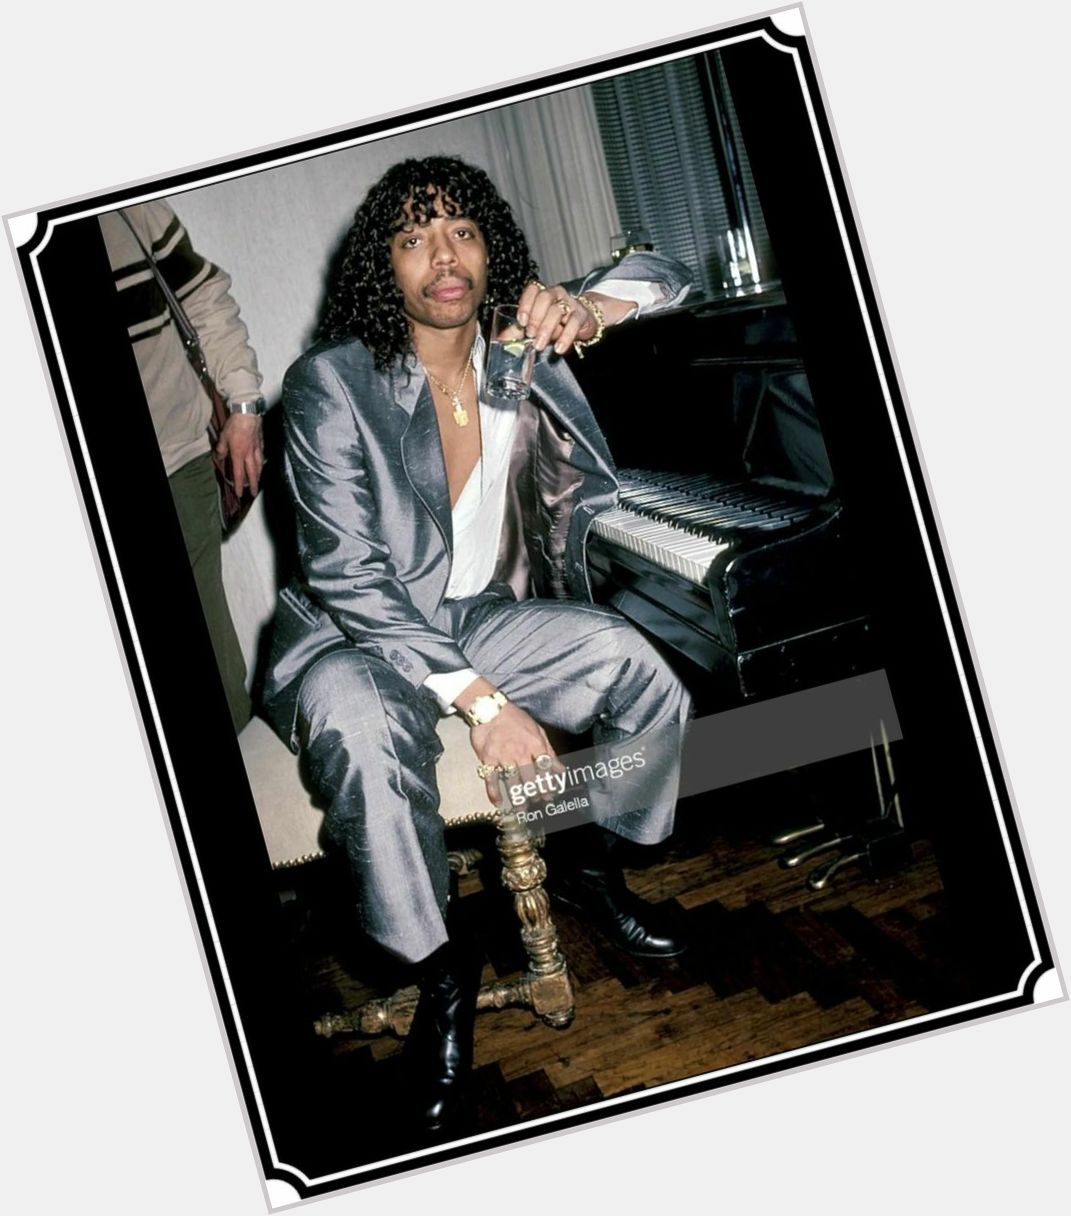 HAPPY BIRTHDAY RICK JAMES! 
CONTINUE TO REST IN POWER  